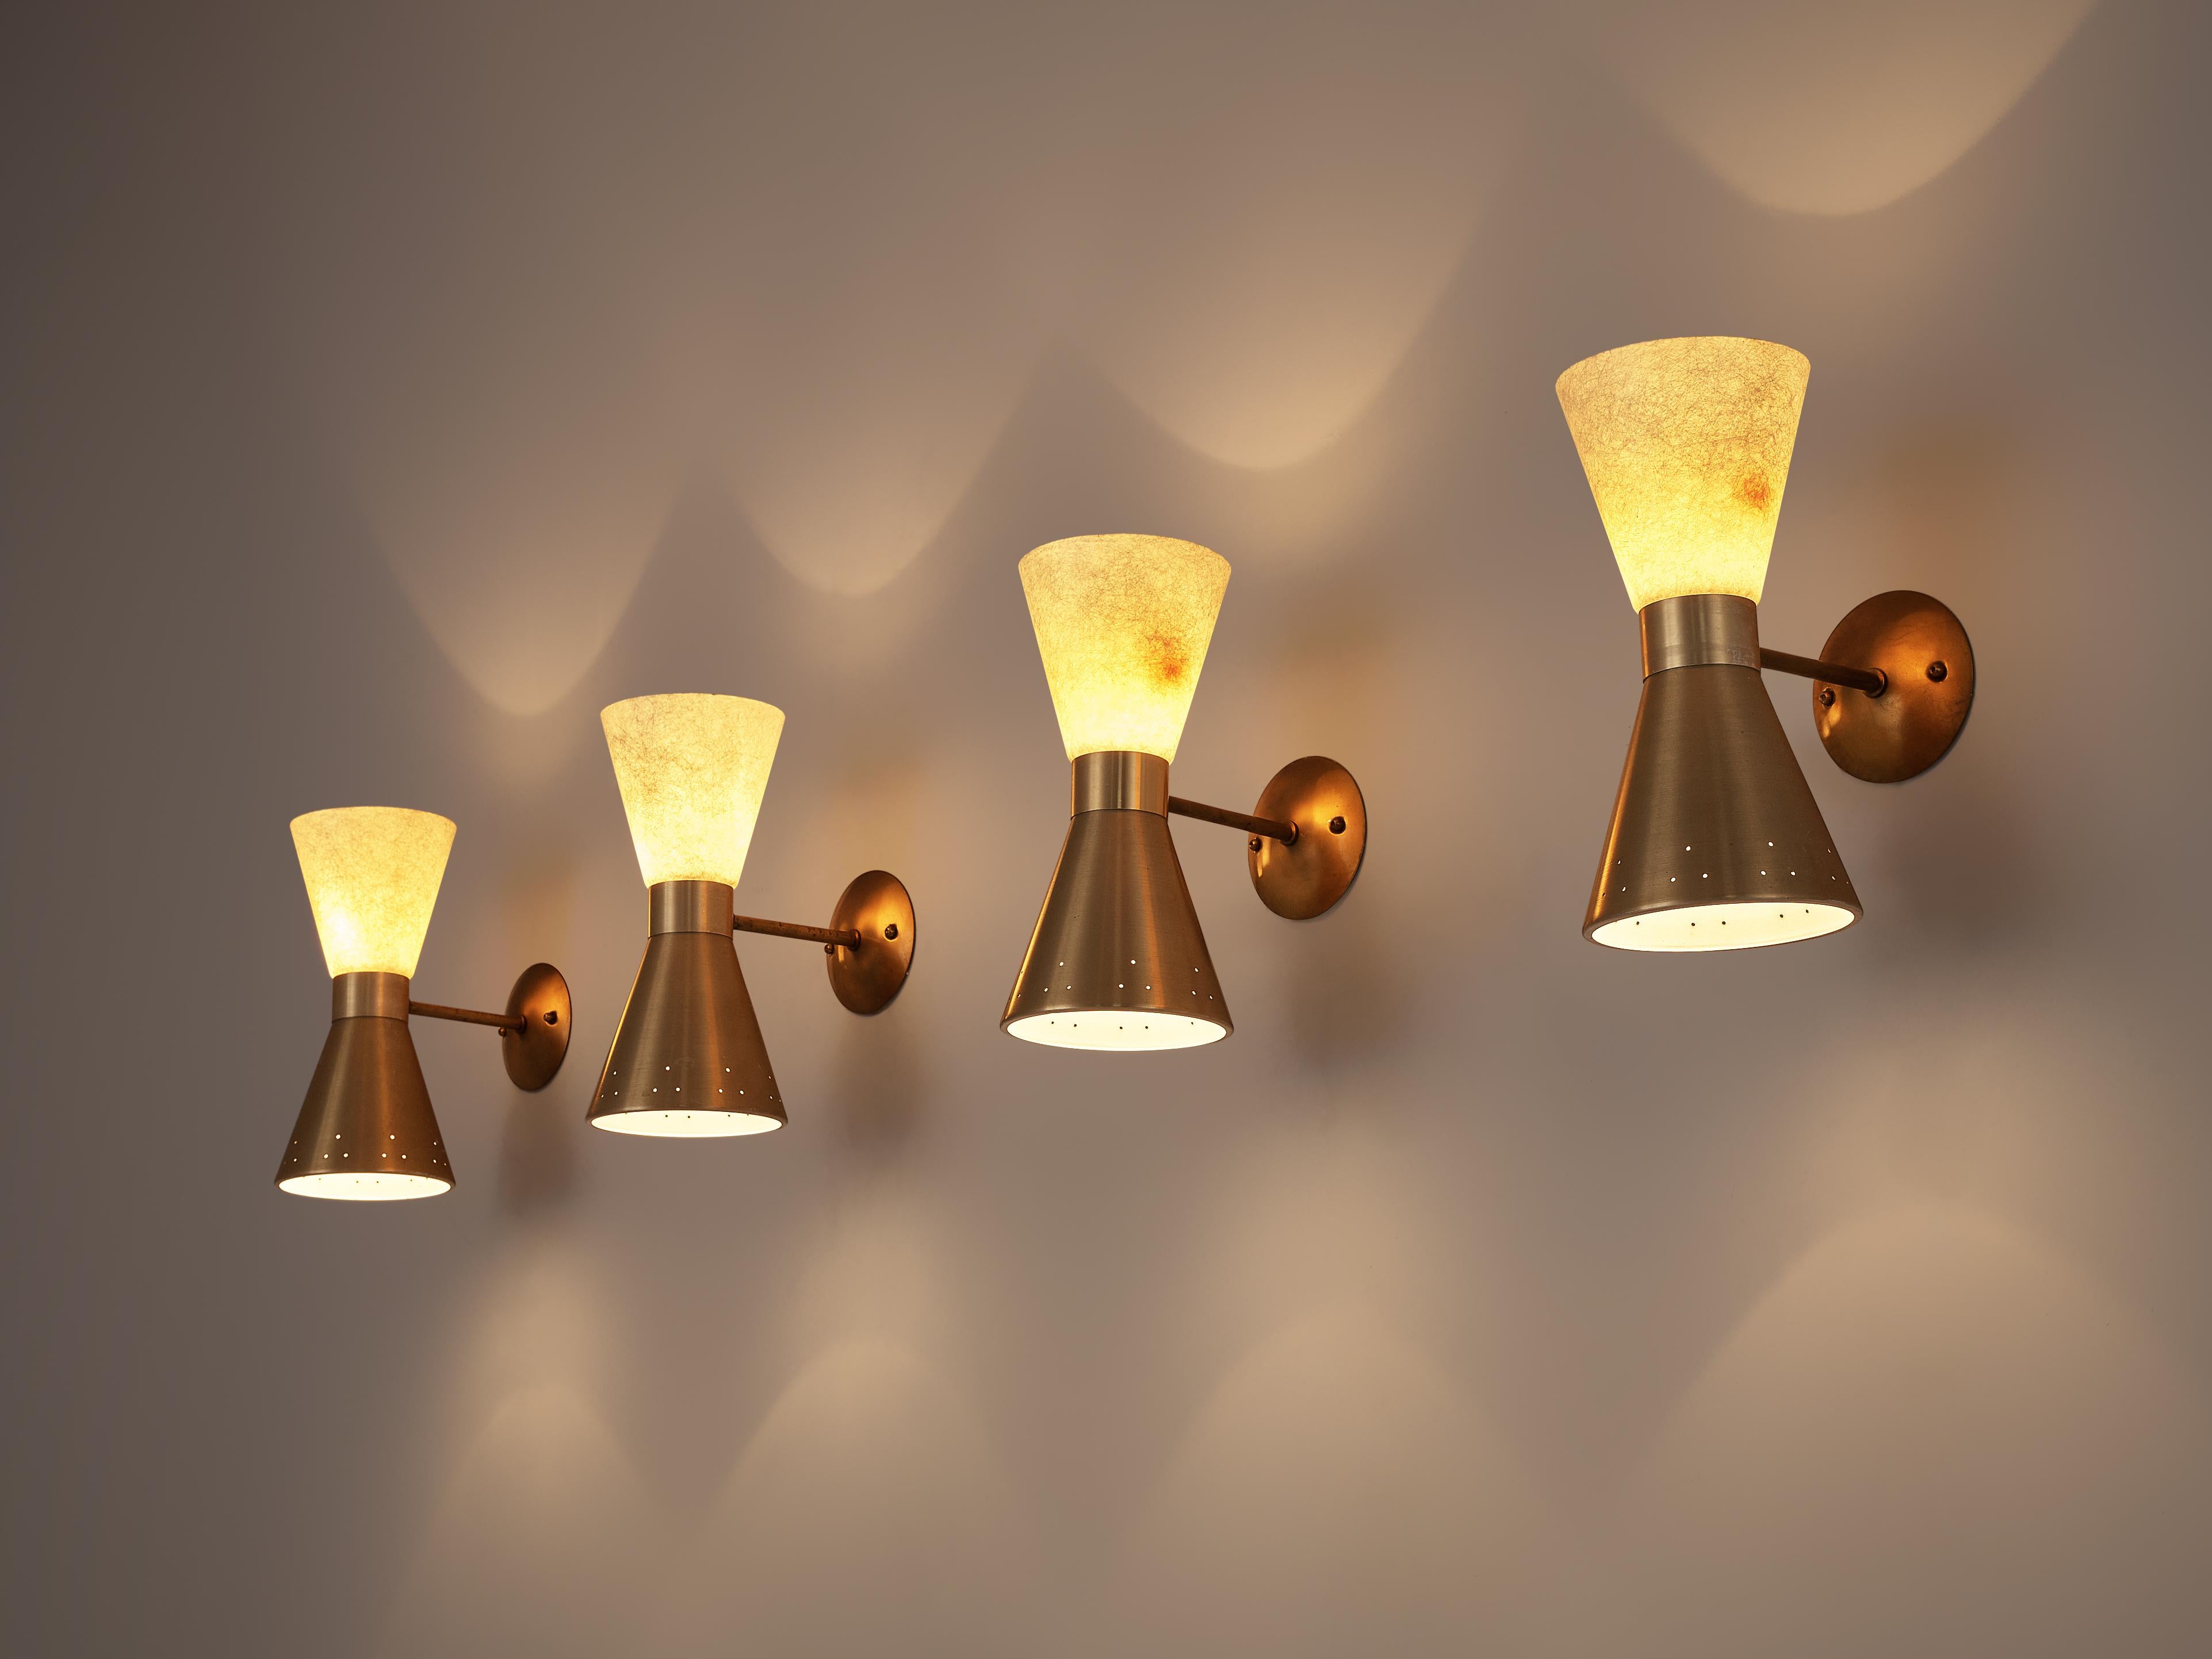 Wall lights, brass, fiberglass, Europe, 1950s

With two cone-shaped lampshades these wall lights shine up and down. One cone is made of perforated brass while the other one features an off-white shade in structured fiberglass. When switched on, the